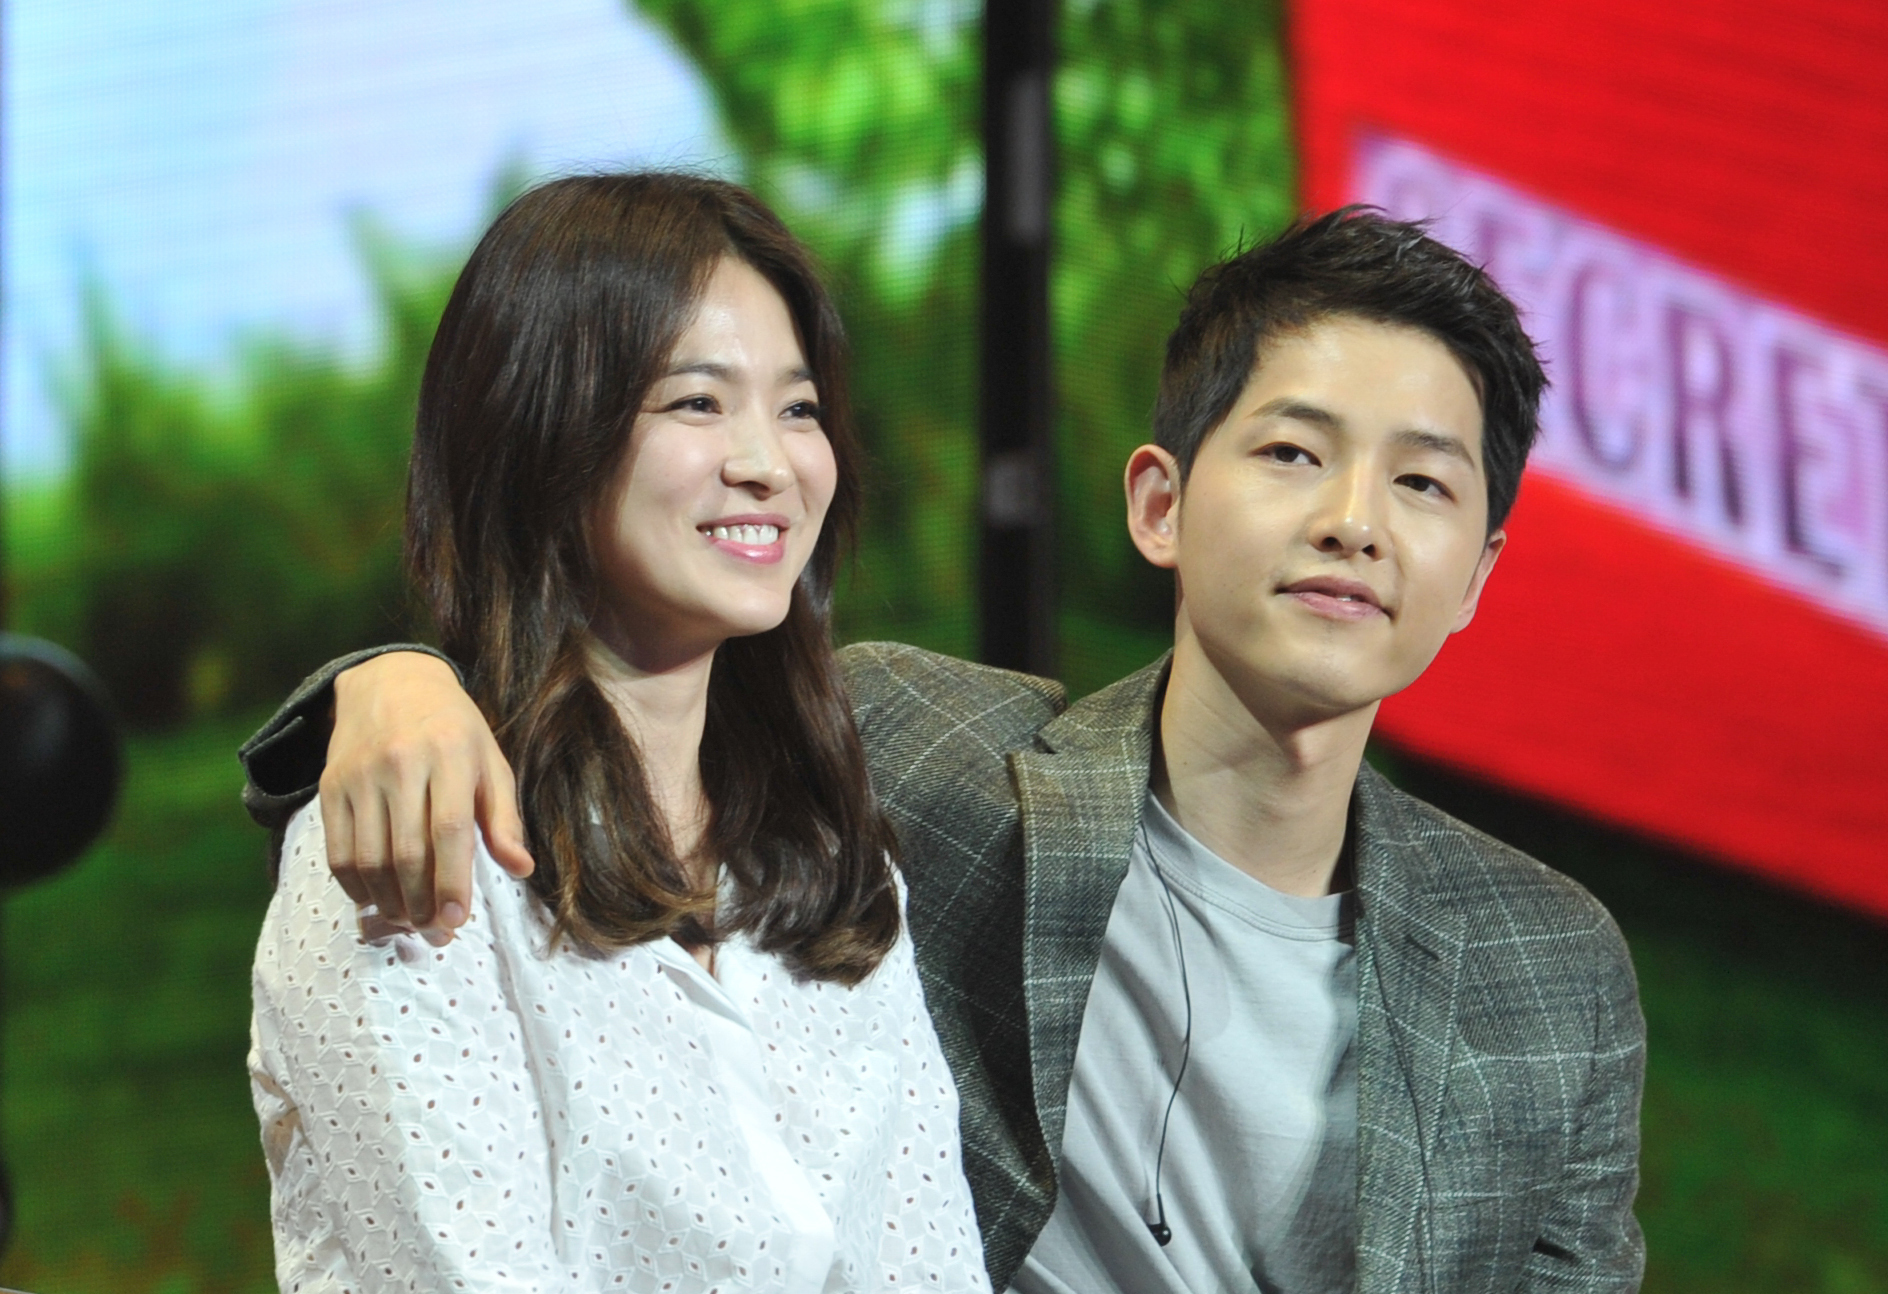 Song Hye Kyo and Song Joong-ki in Chengdu, Sichuan Province of China, on June 17, 2016. | Source: Getty Images